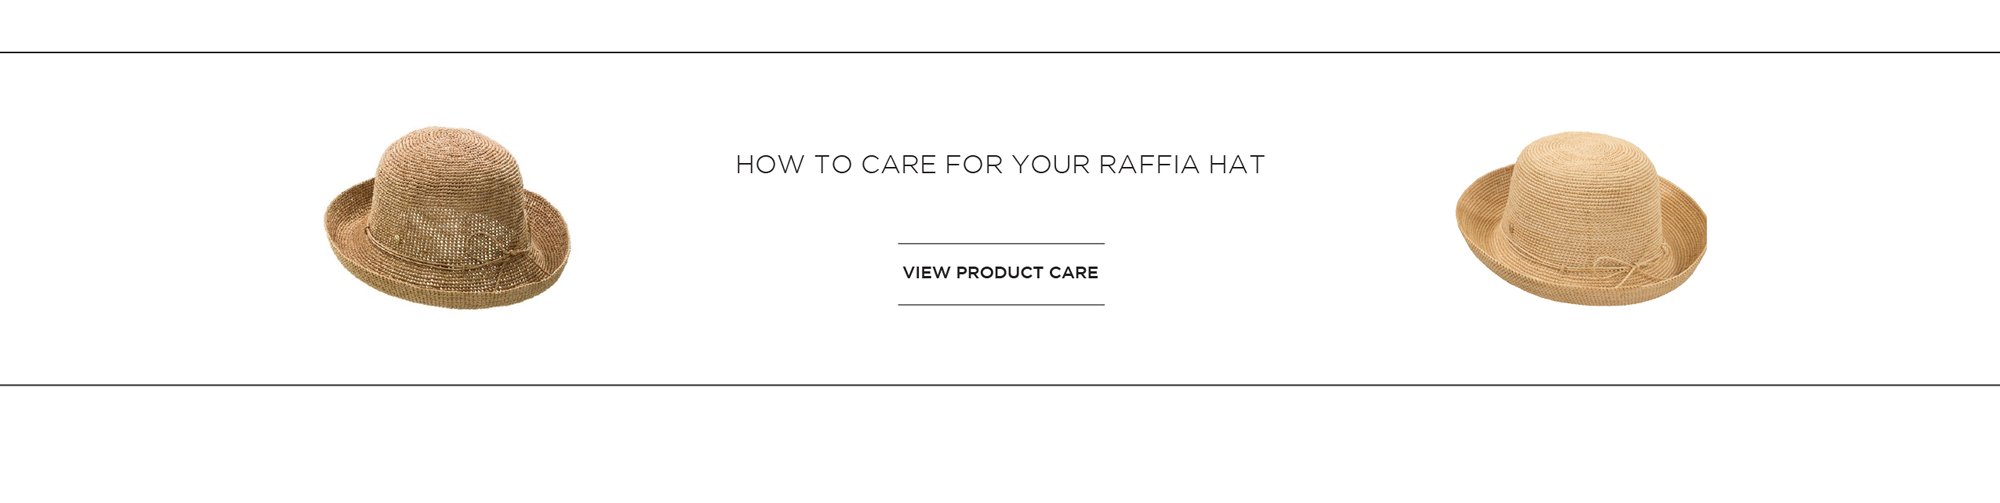 How to care for your hat